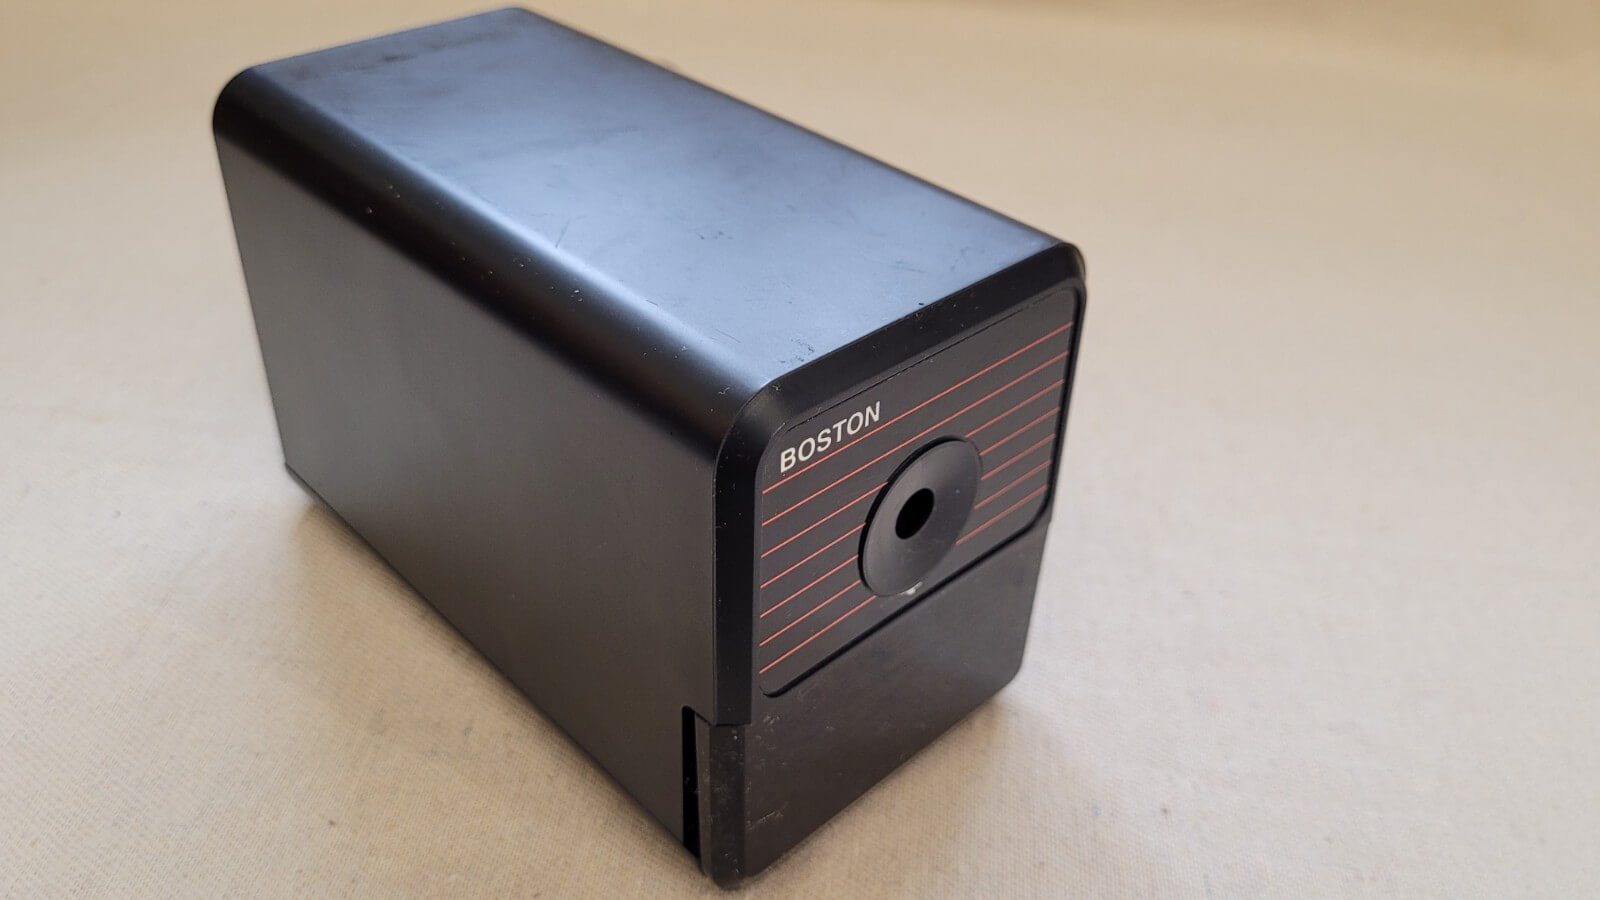 Vintage Boston Black Electric Pencil Sharpener Model 18 by Hunt Corporation USA Office equipment collectibles